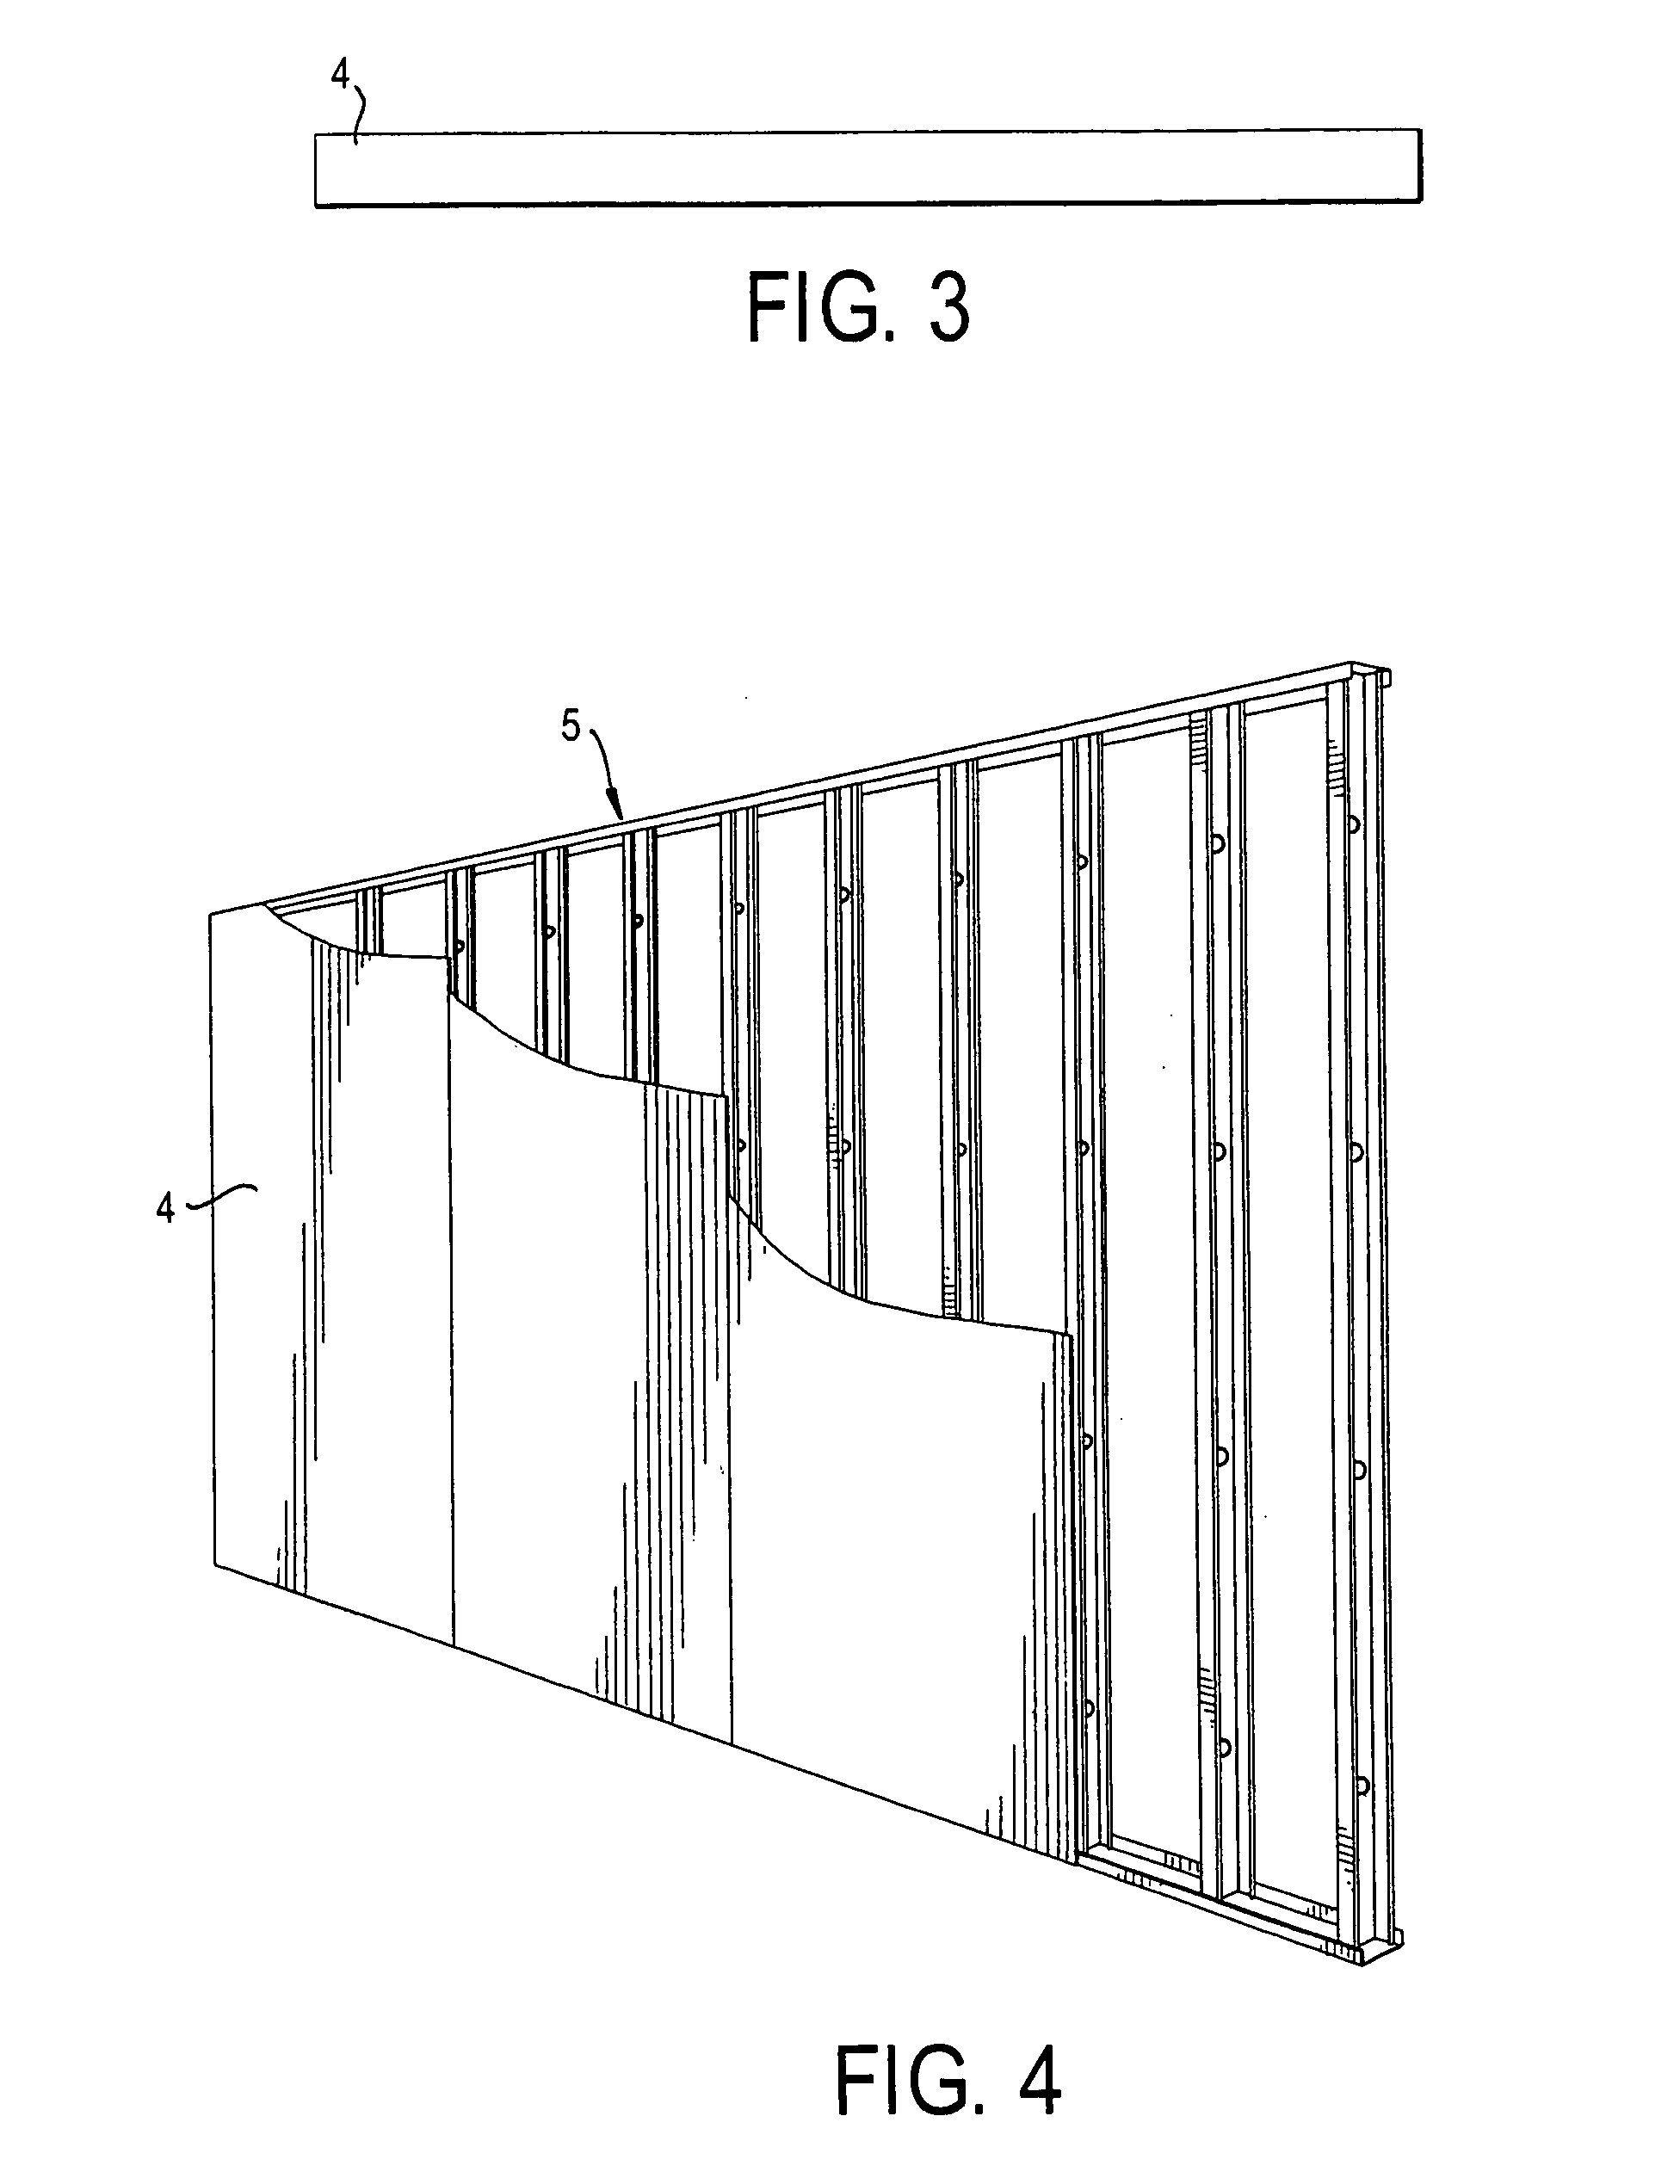 Non-combustible reinforced cementitious lighweight panels and metal frame system for a fire wall and other fire resistive assemblies